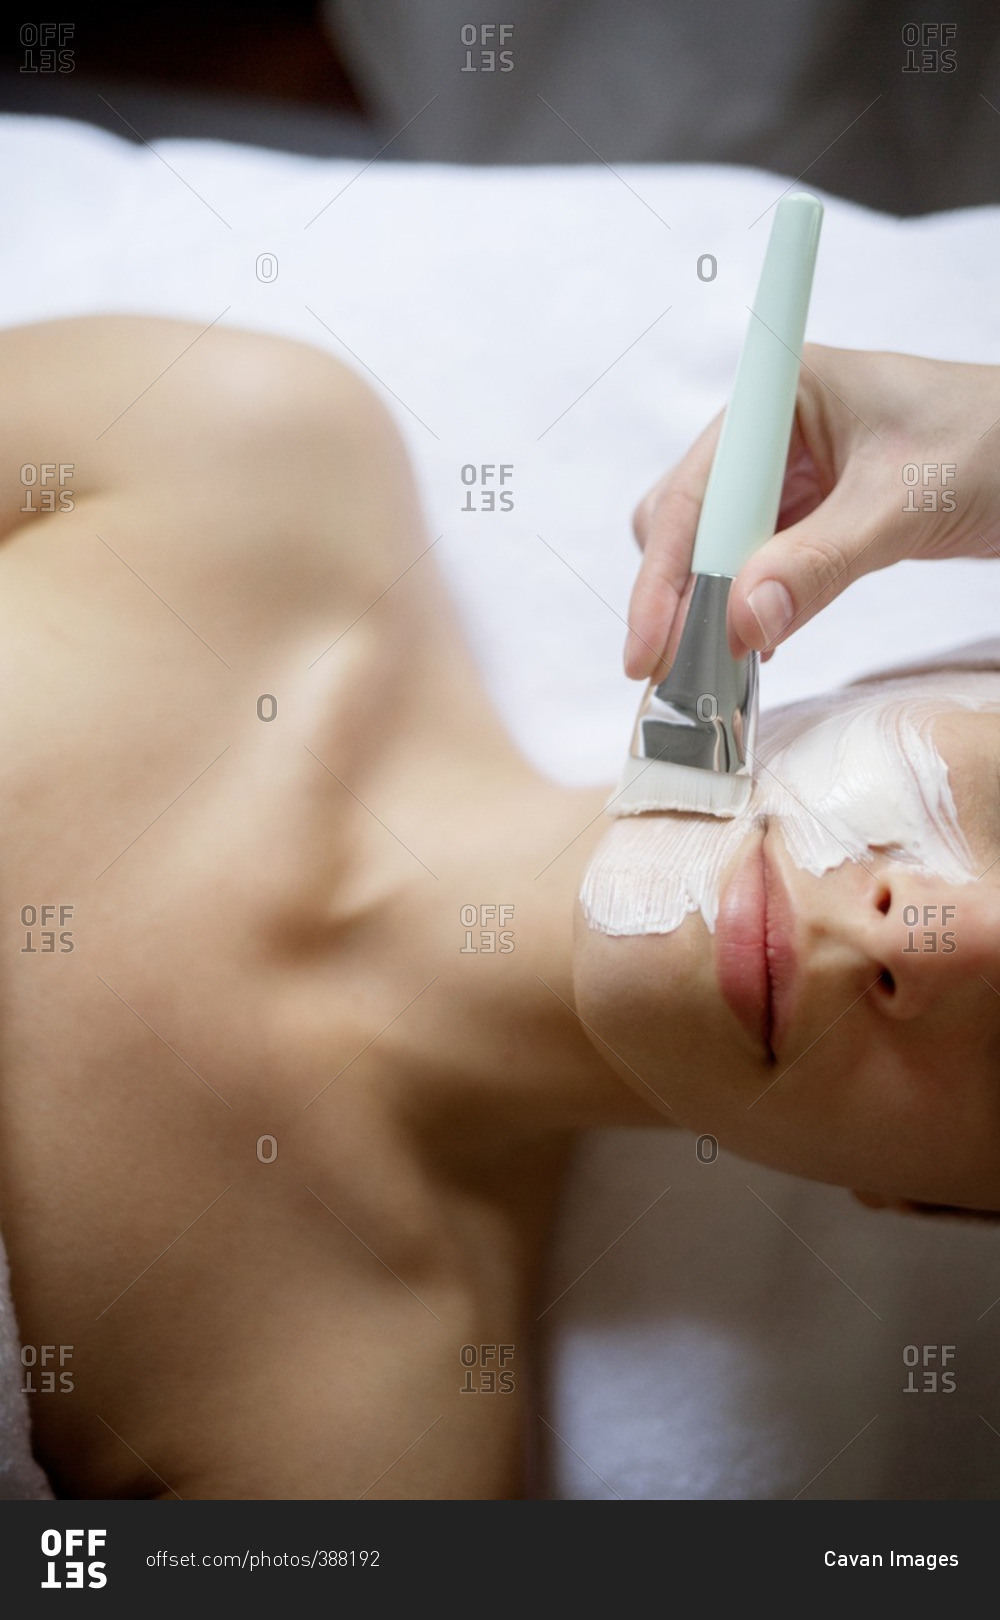 Overhead view of cream being applied on woman's face in spa